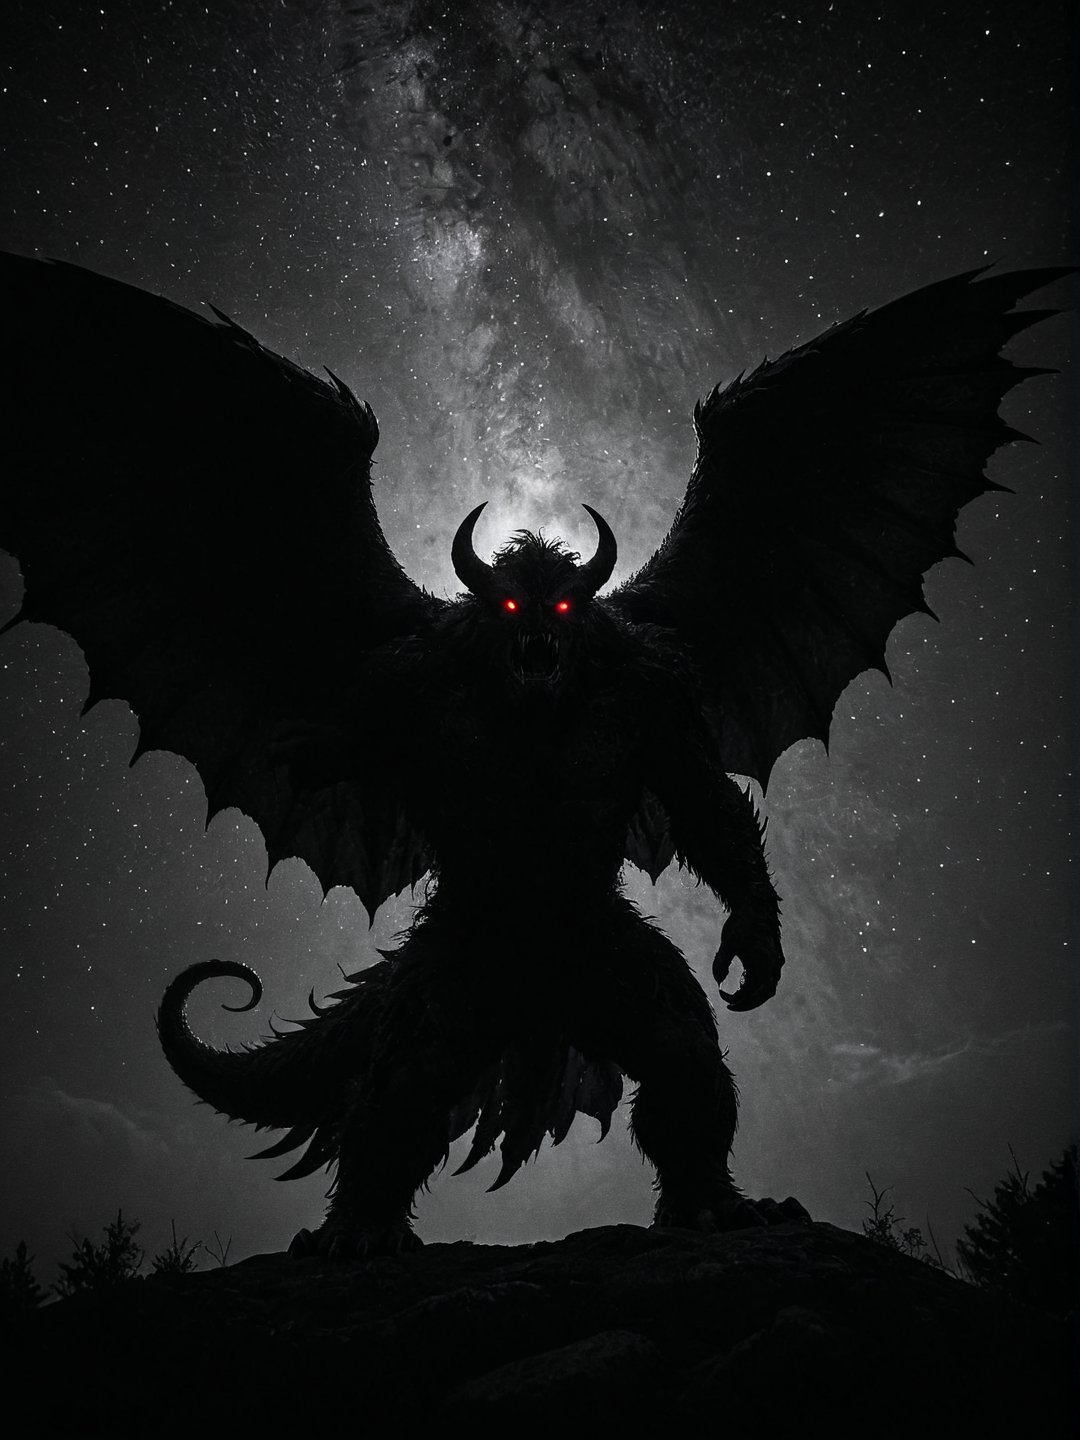 Realism, digital black and white photo, portrait, wide angle of view, Stars, a dark night, a silhouette of a monster with wings, eyes glow red, dramatic darknes,